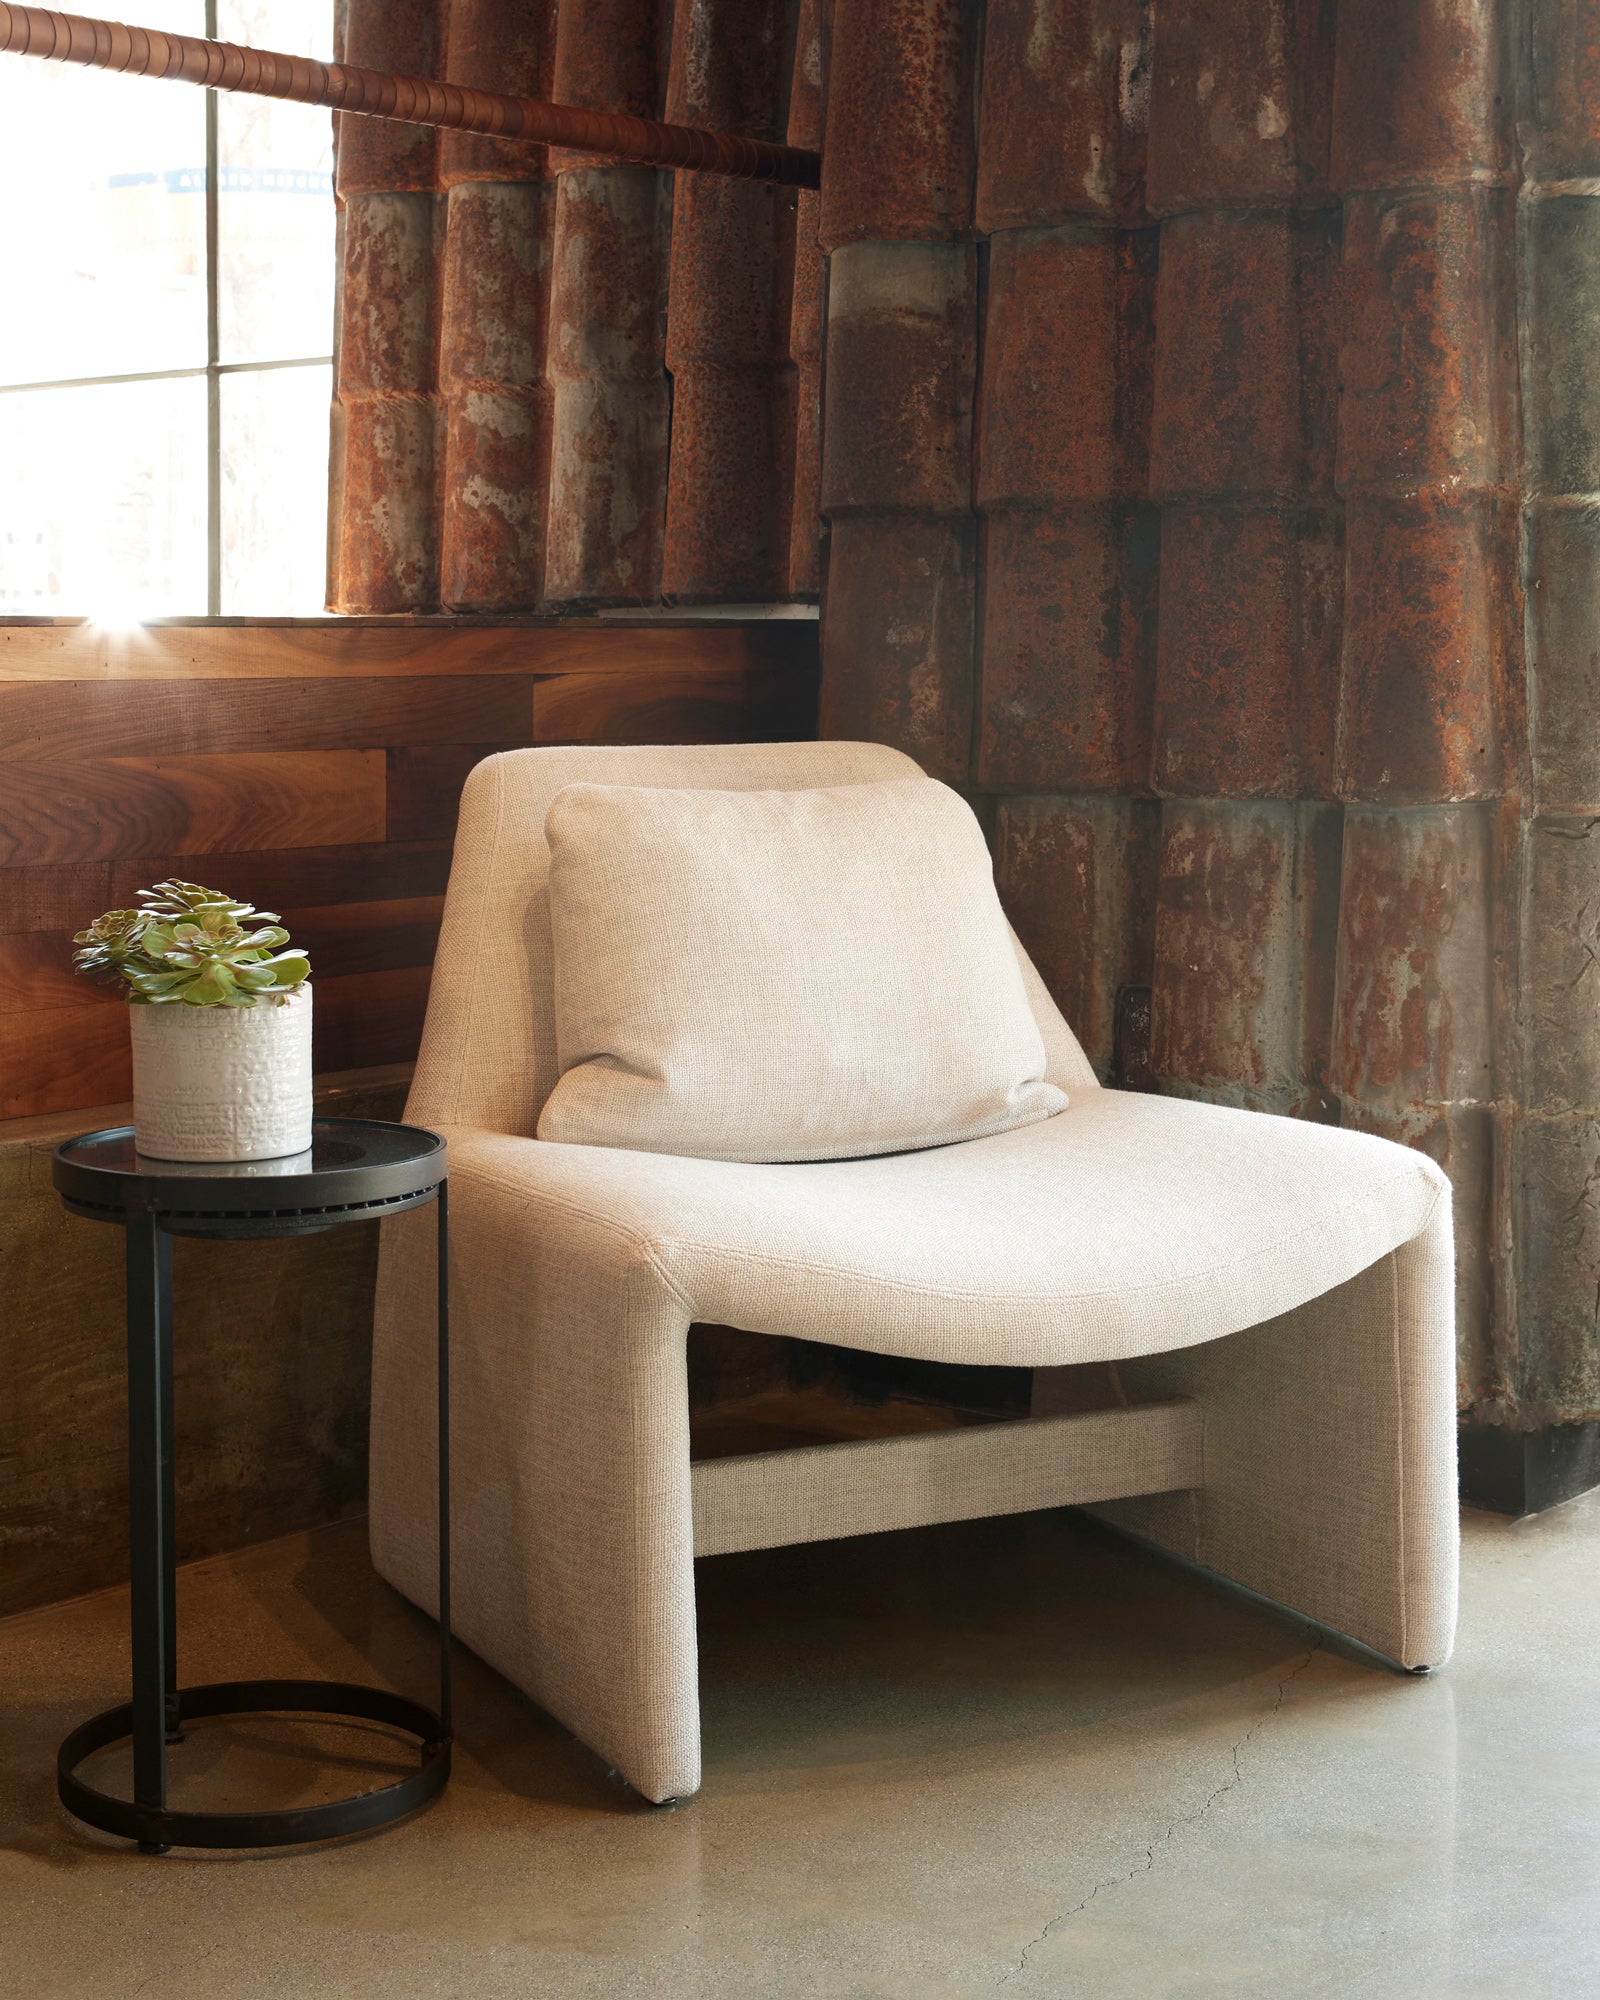  Chair in front of a wall with brown tiles. A round side table on the left with a plant on top. Photographed in Bellamy Natural. 